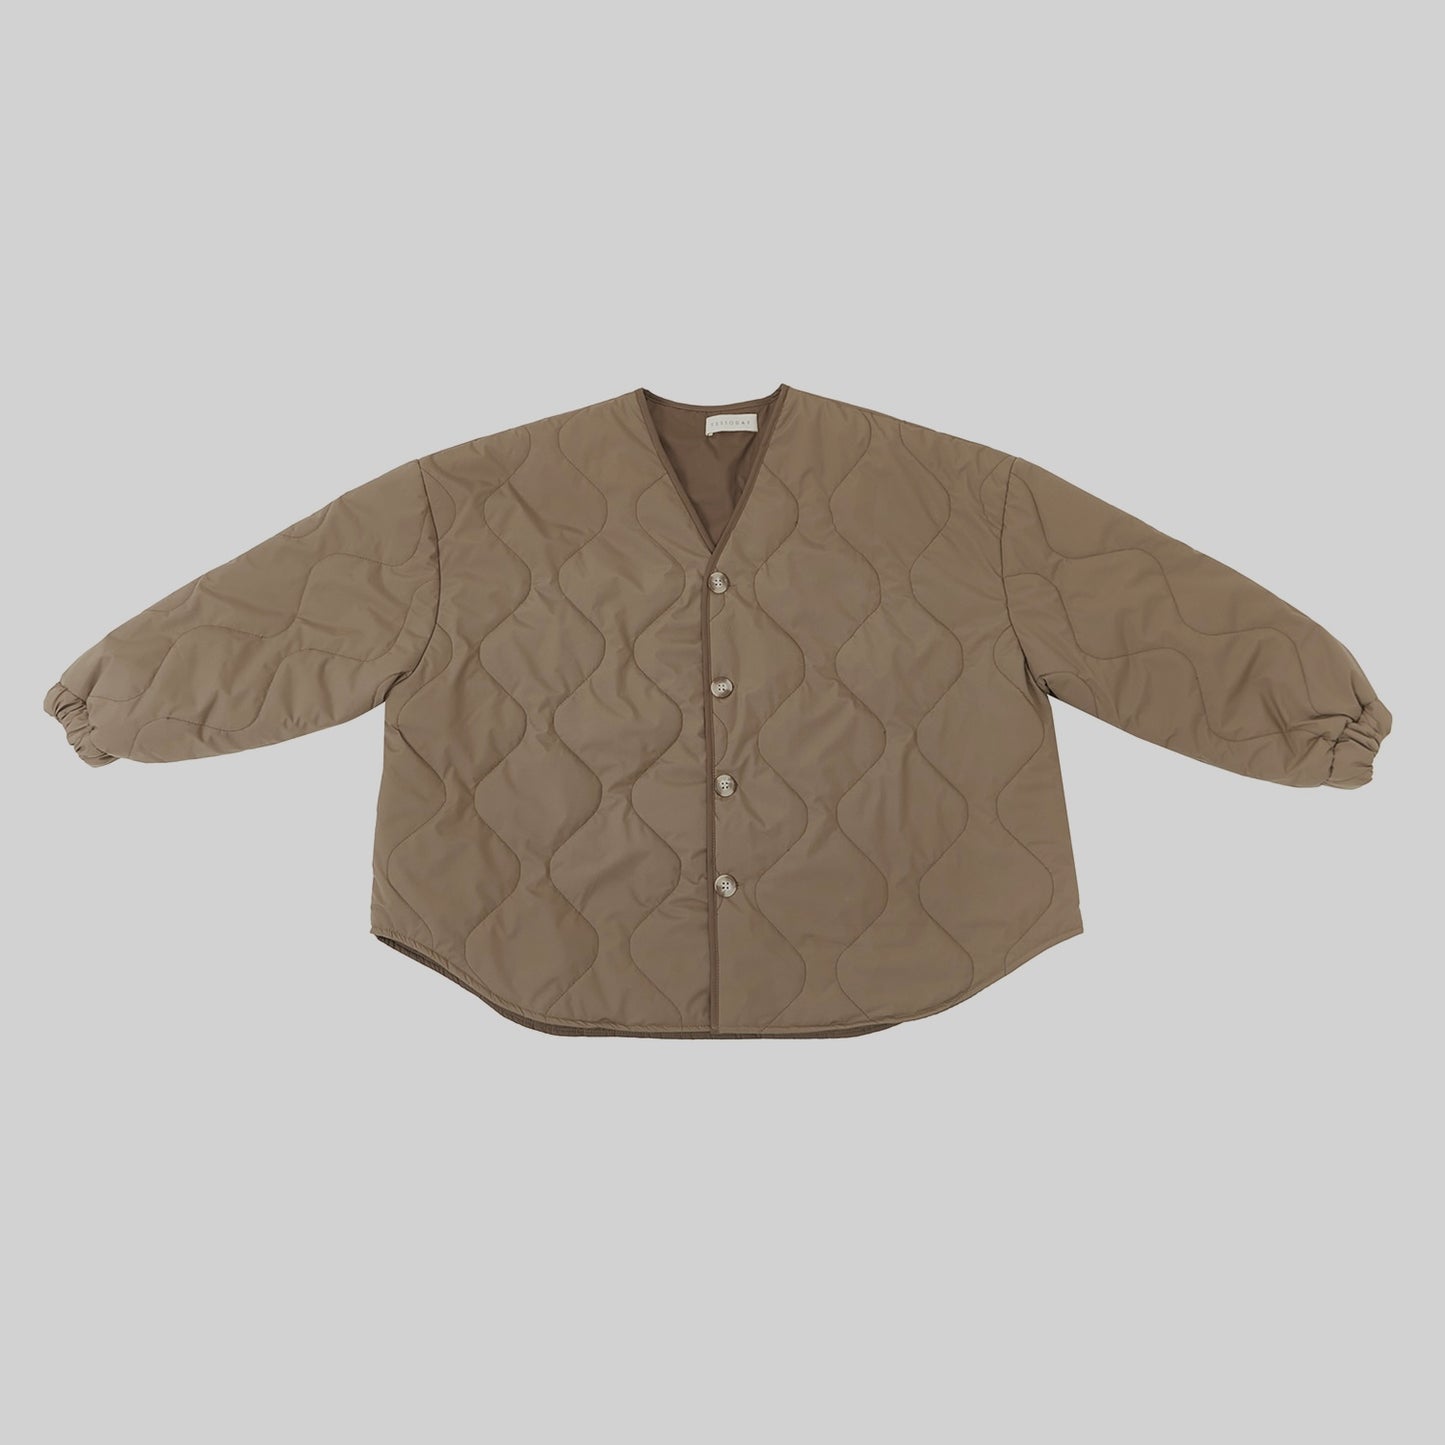 Fashionlink Yestoday Quilted Jacket